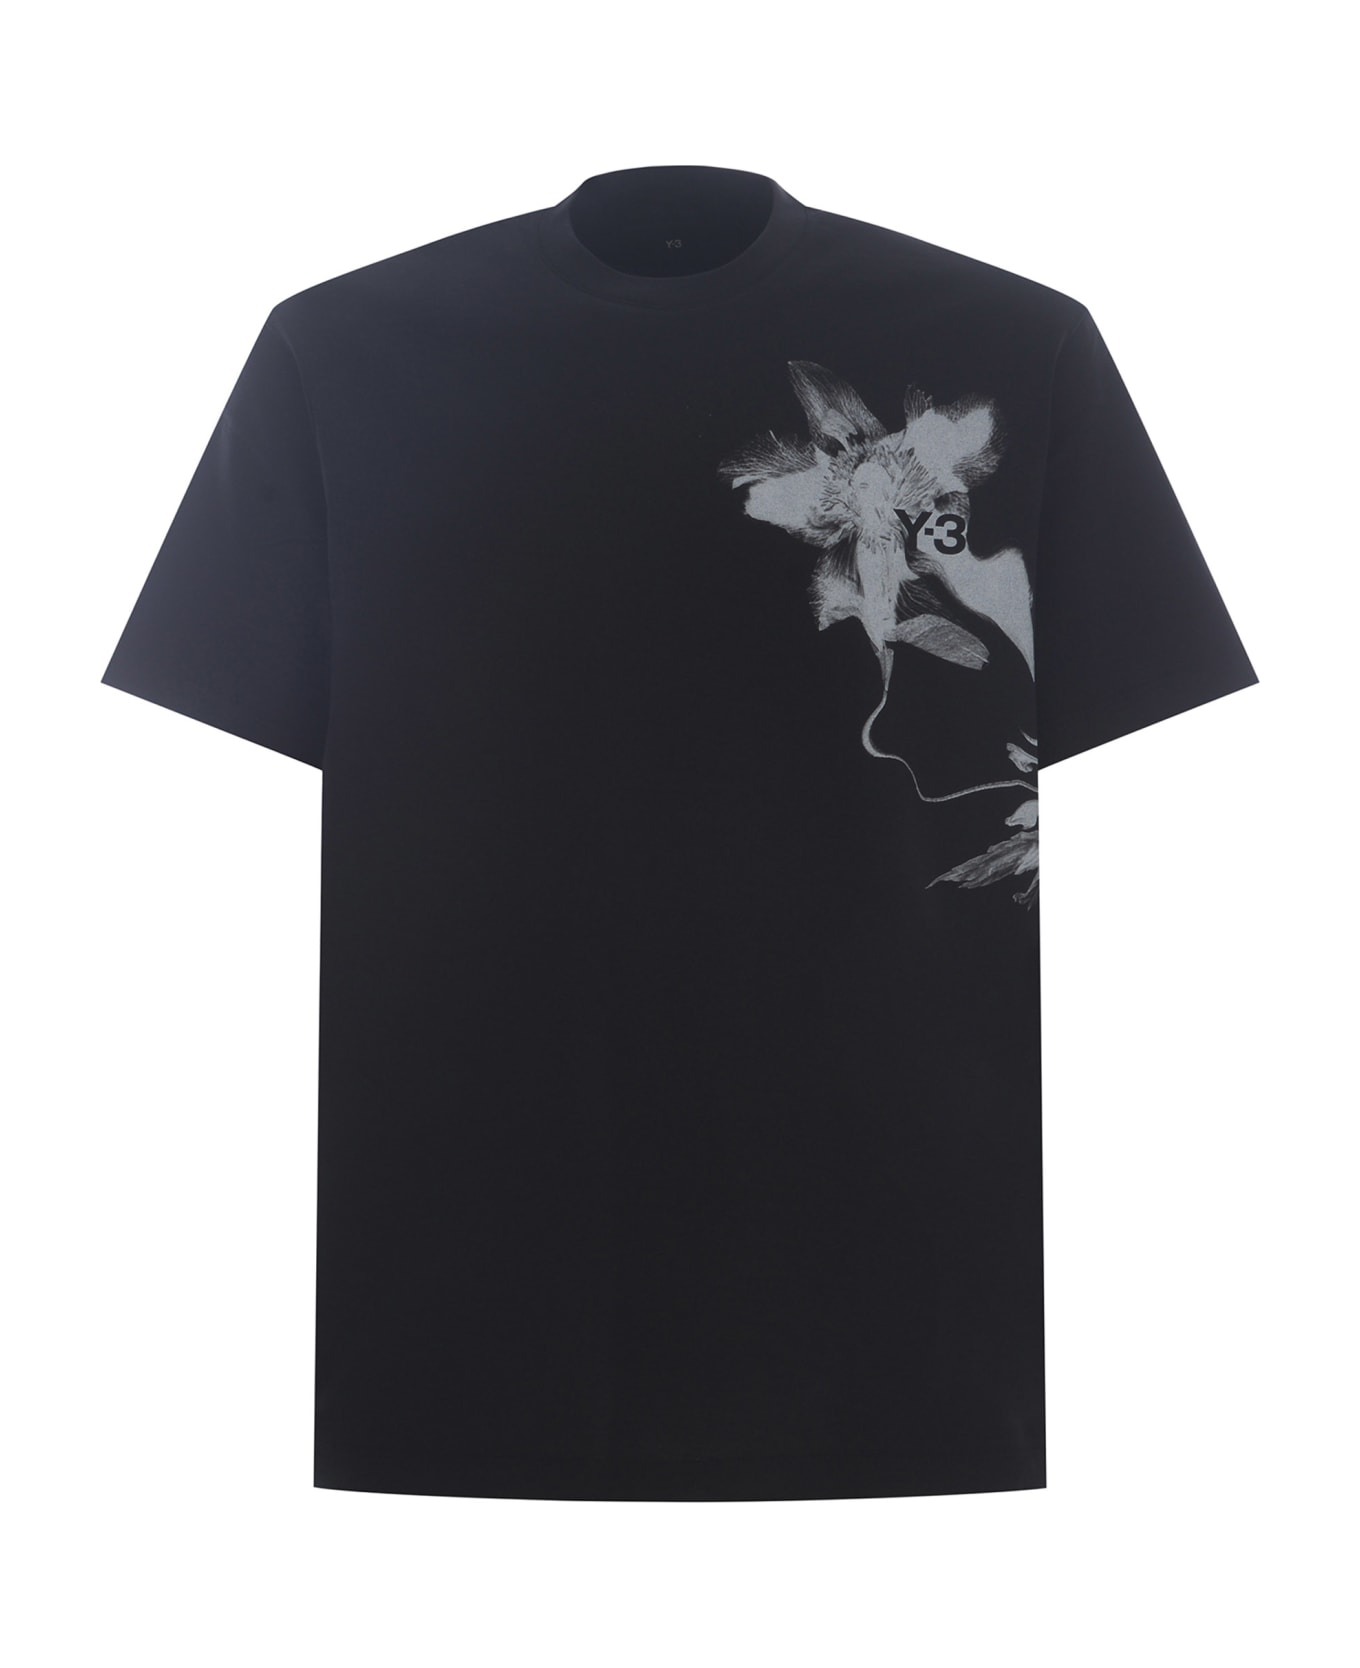 Y-3 T-shirt Y-3 "graphic" Made Of Cotton Jersey - Nero シャツ